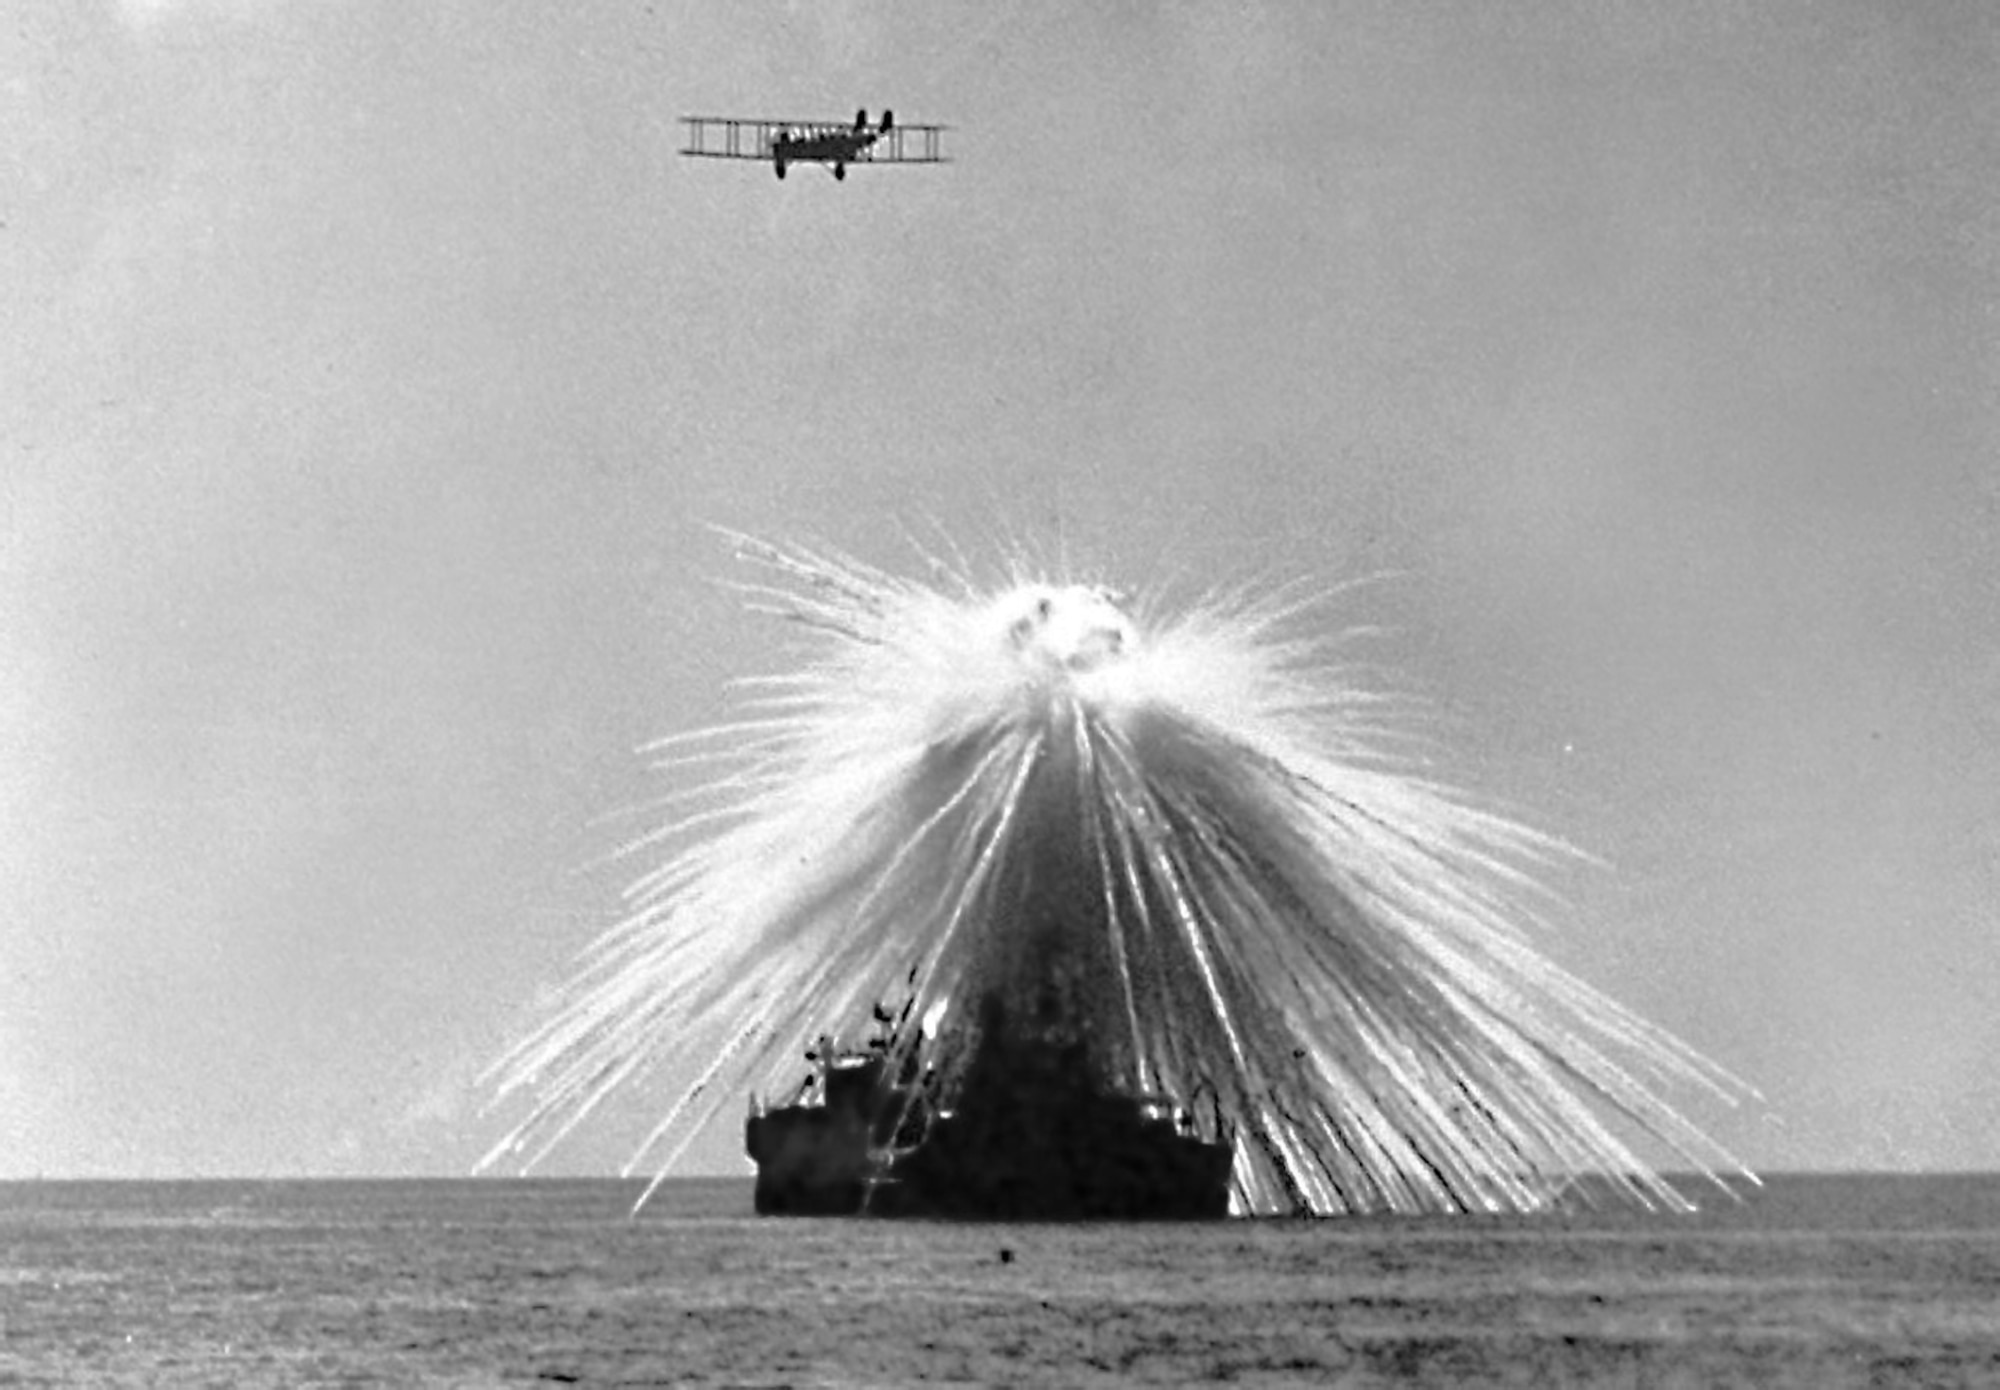 An MB-2 hits its target, the obsolete battleship USS Alabama during tests. On Sep. 27, 1921, still operating with Mitchell’s provisional air brigade, the group’s MB-2 aircraft bombed and sank the ex-U.S. Navy battleship Alabama (BB-08) in Tangier Bay, Chesapeake Bay, Md.